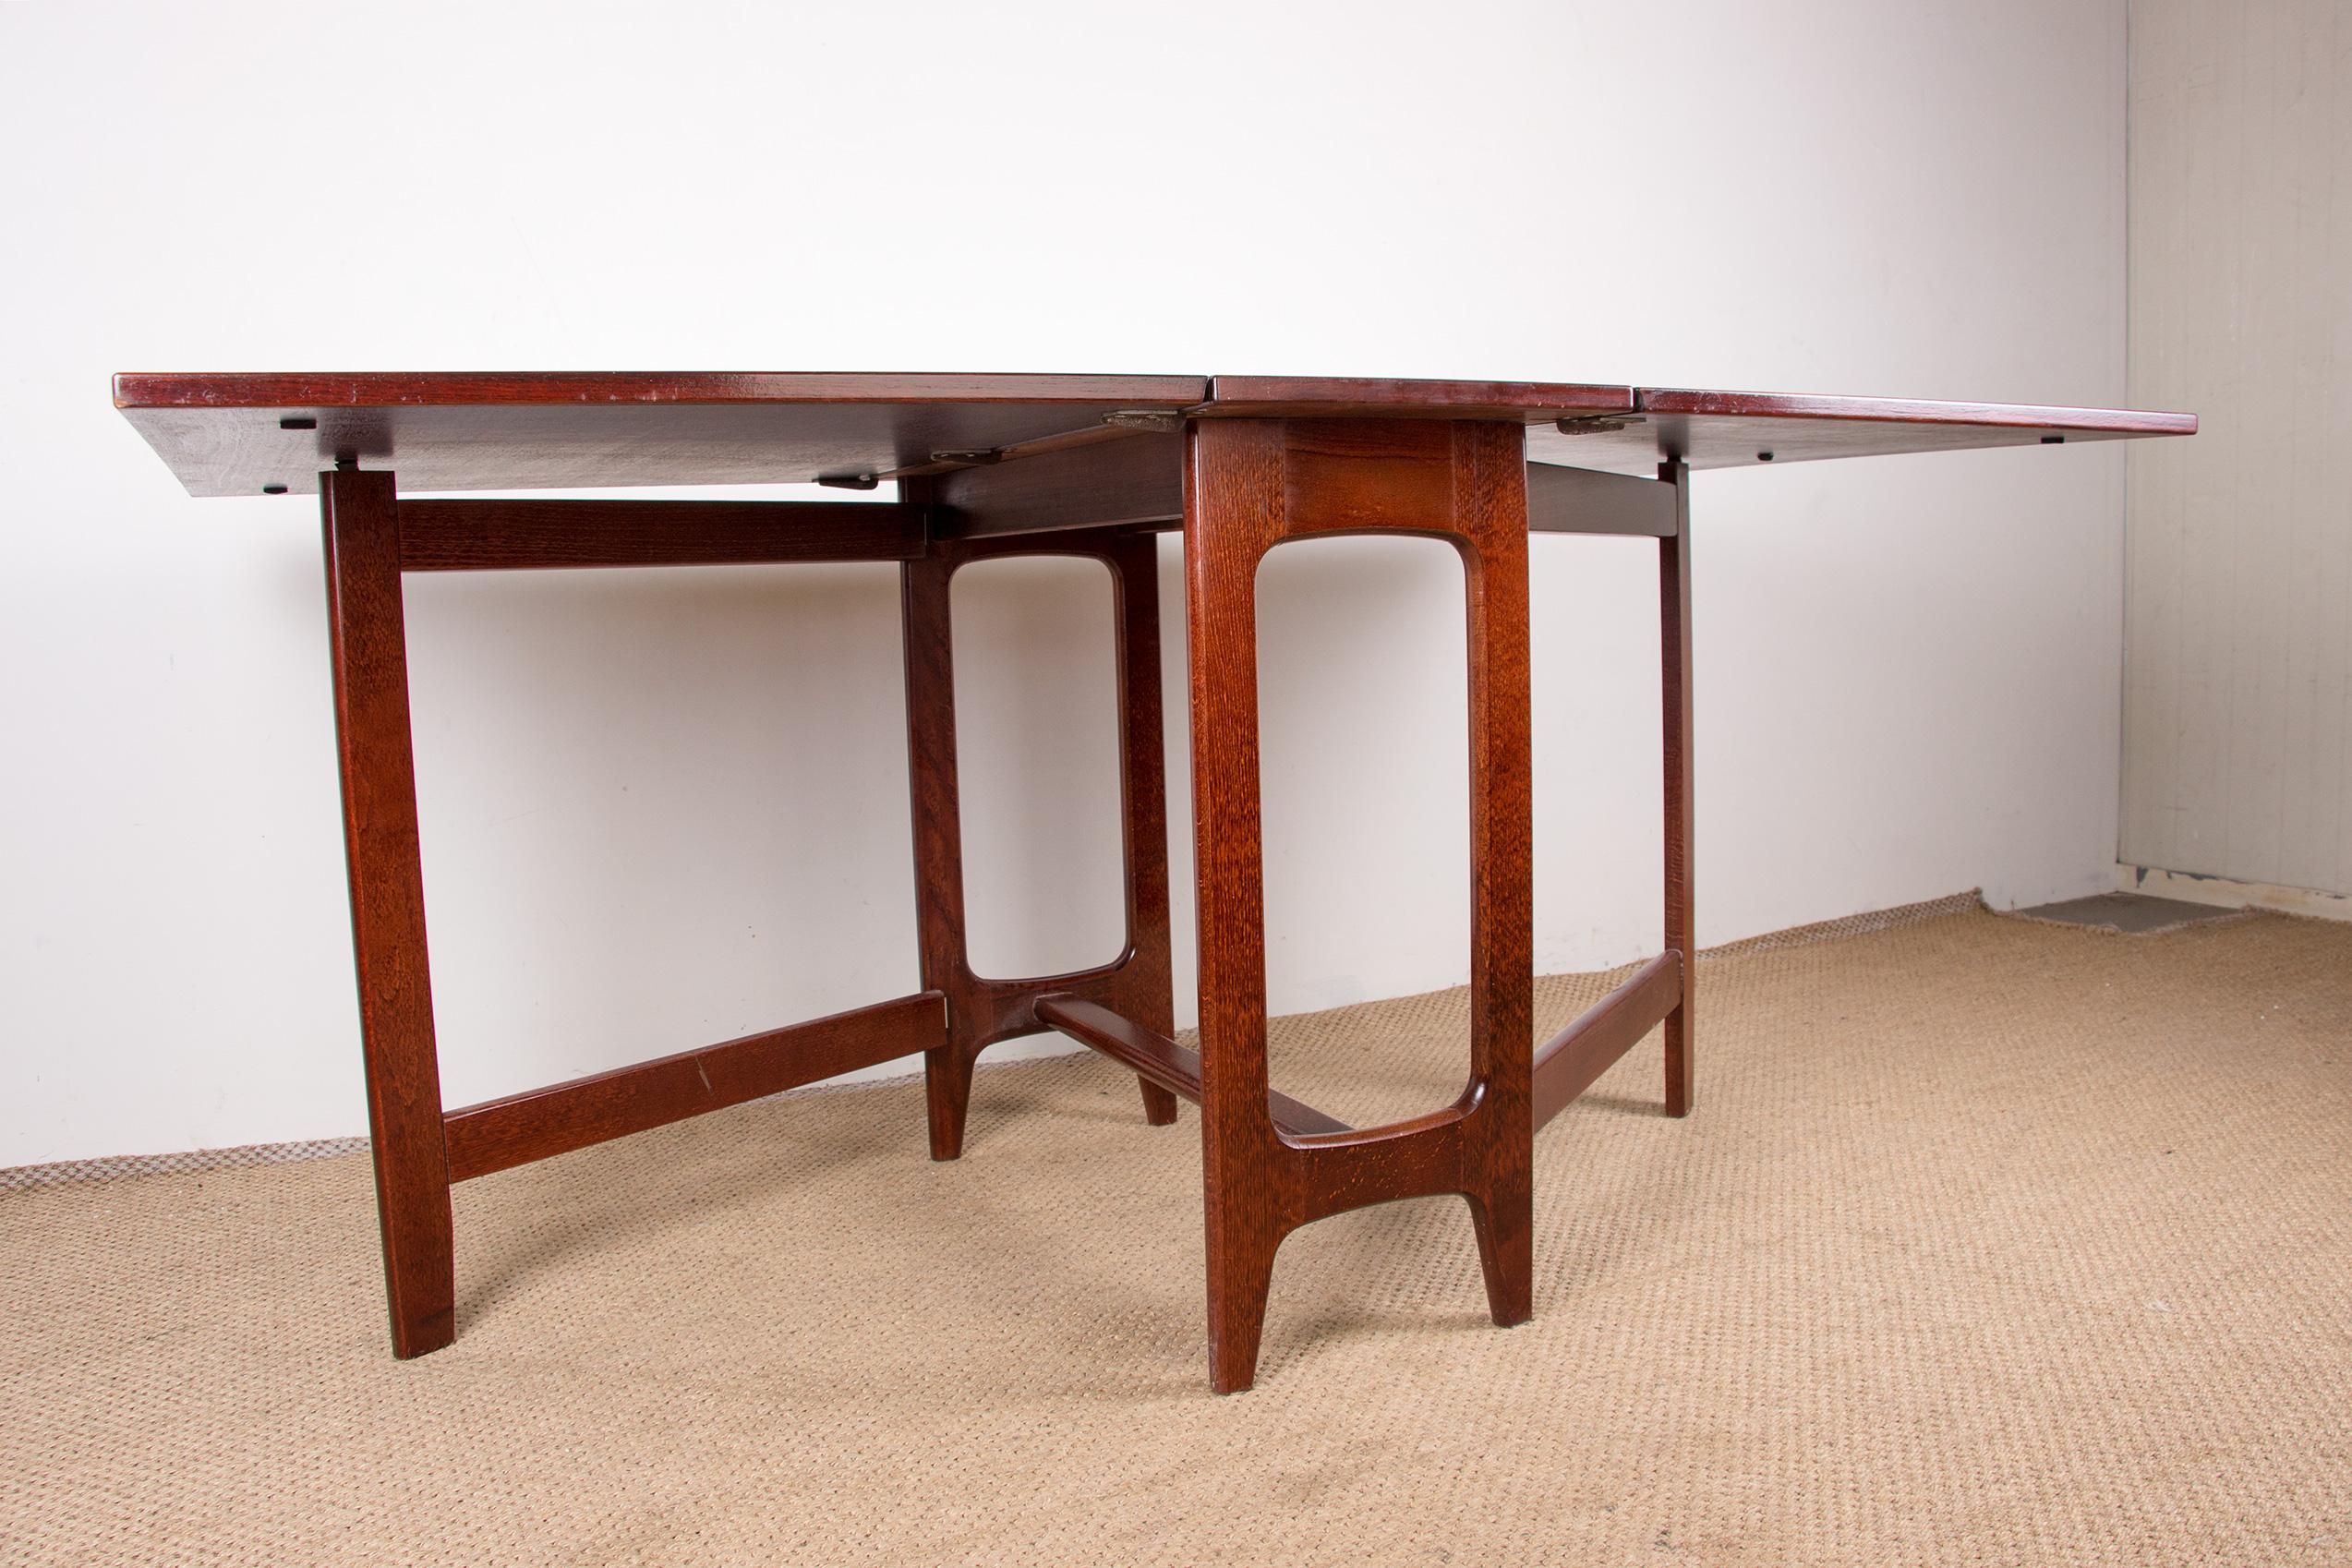 Mid-20th Century Norwegian Rosewood Folding Dining Table by Bernt Winge for Kleppes Mobelfabrik